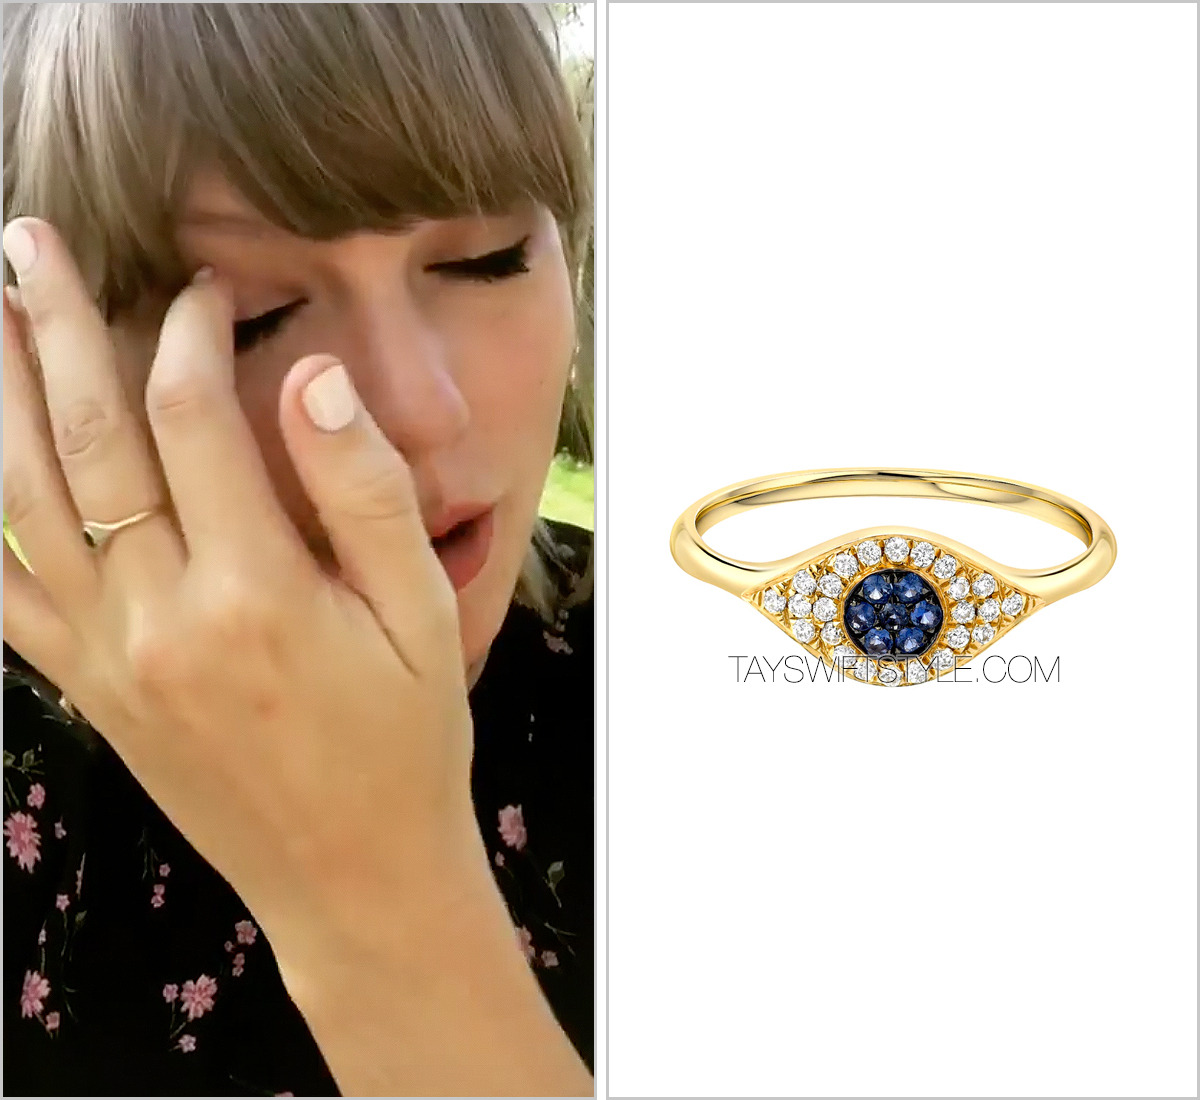 Taylor Swift's Close Friend Helps Design RED (Taylor's Version) Album Ring  Replica